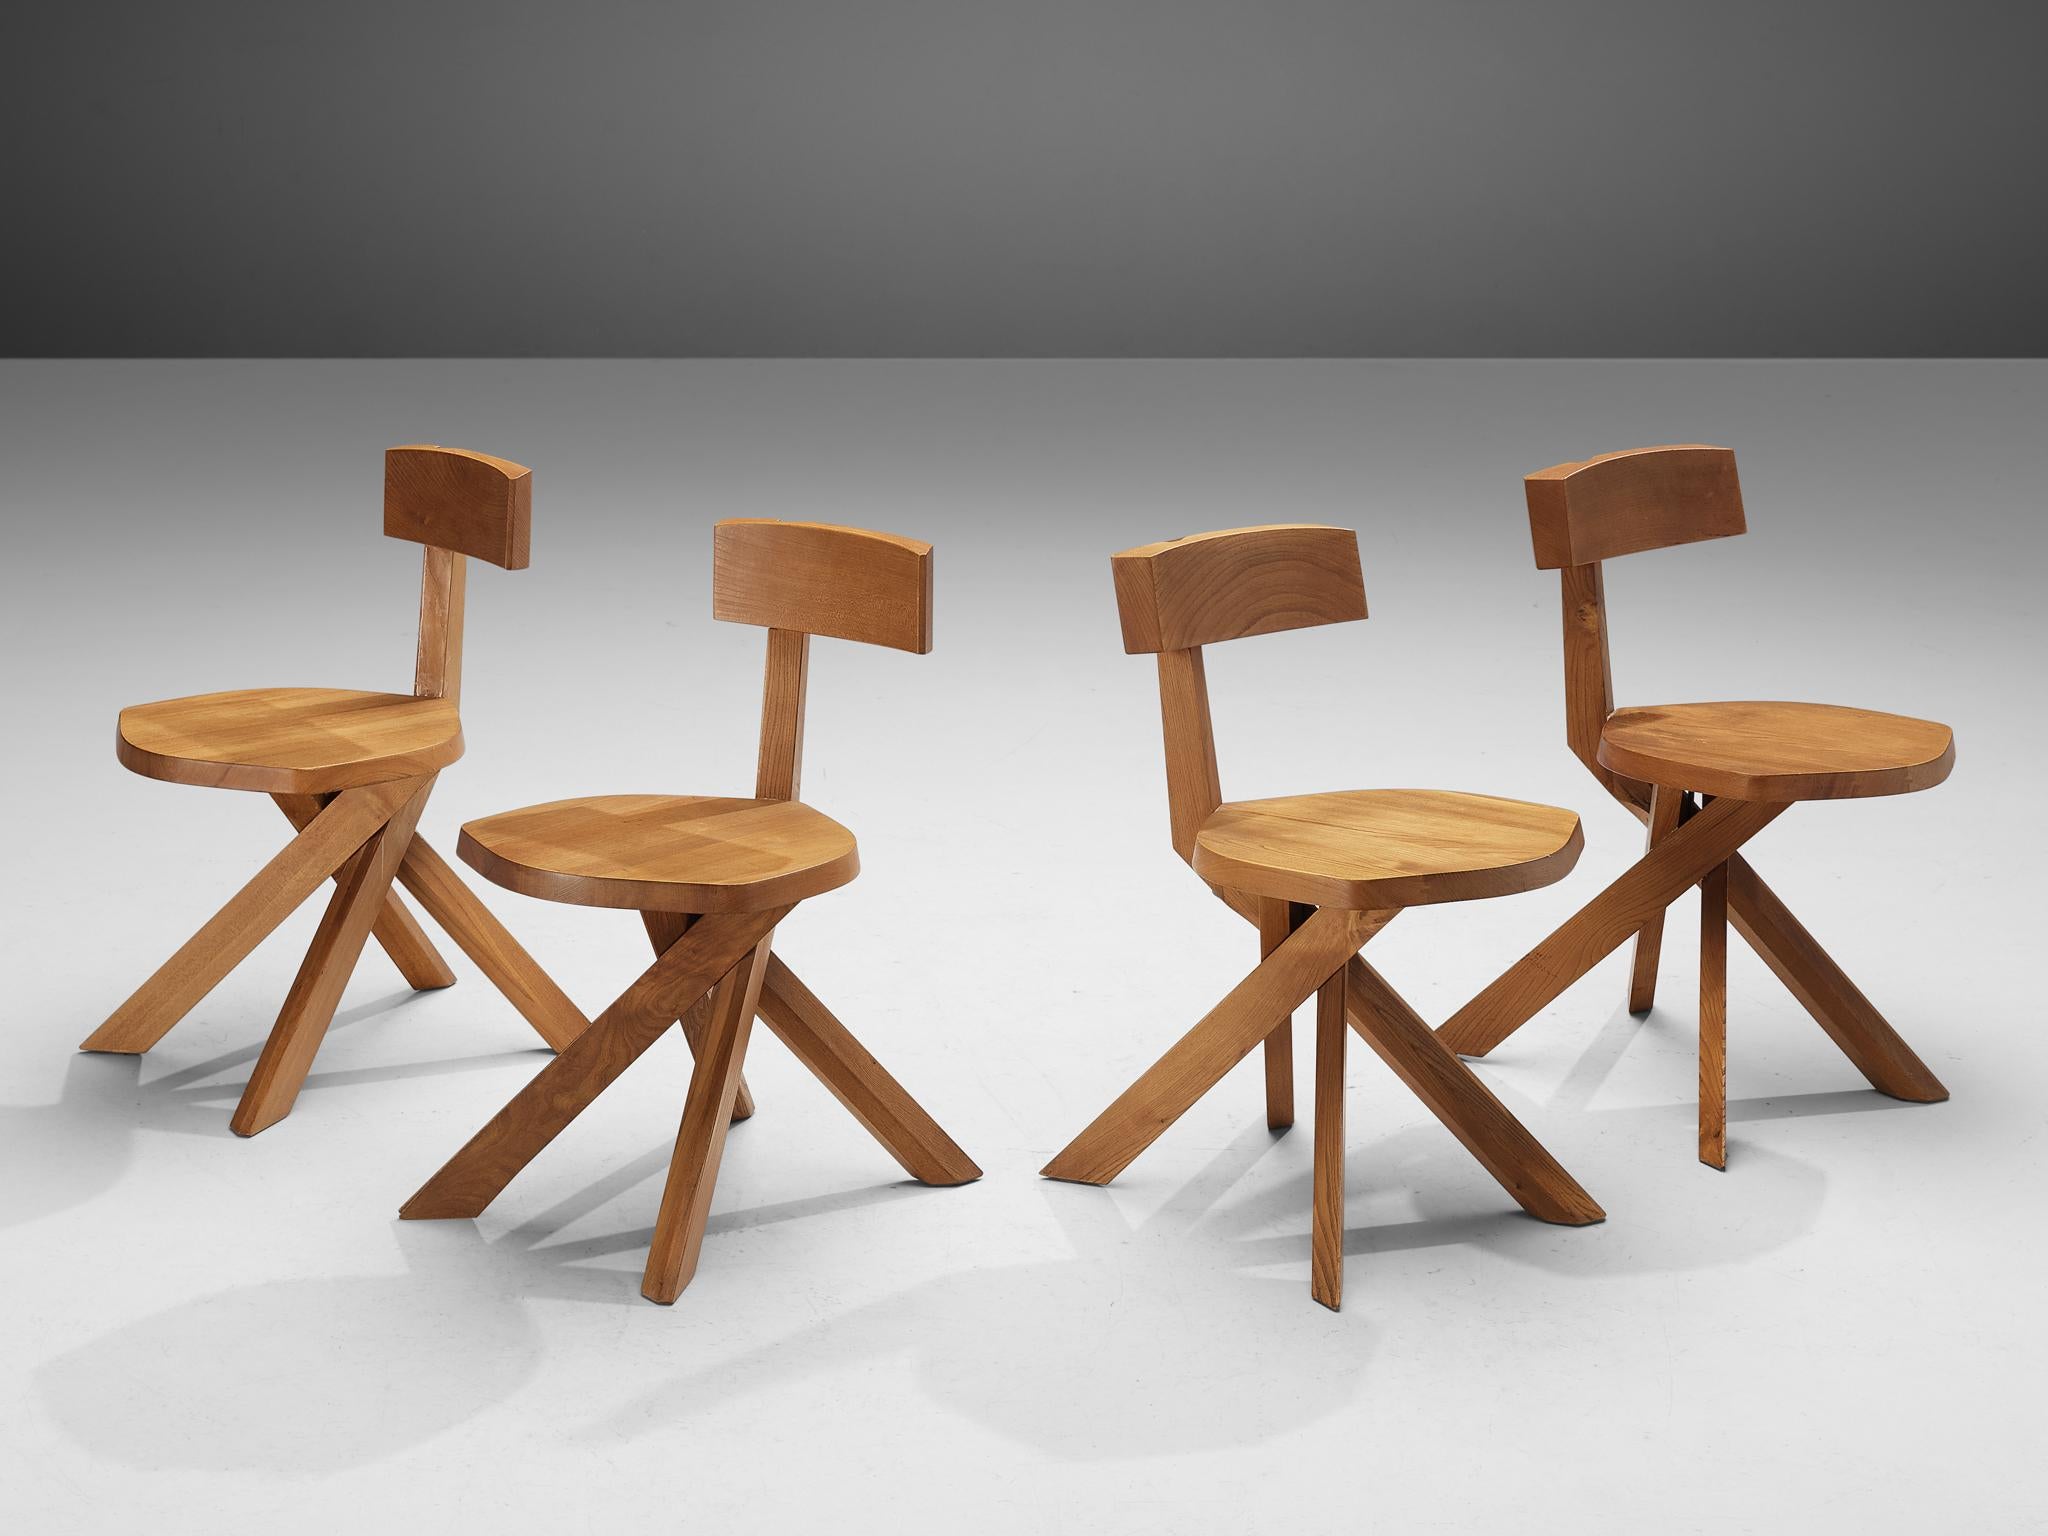 Pierre Chapo, chairs, model 'S34A', elm, France, circa 1973 

This chair model 'S34A' is designed by Pierre Chapo circa 1973. This asymmetrical chair executed in elm with seven-shaped back and twisted base is a true icon of Chapo's playful and